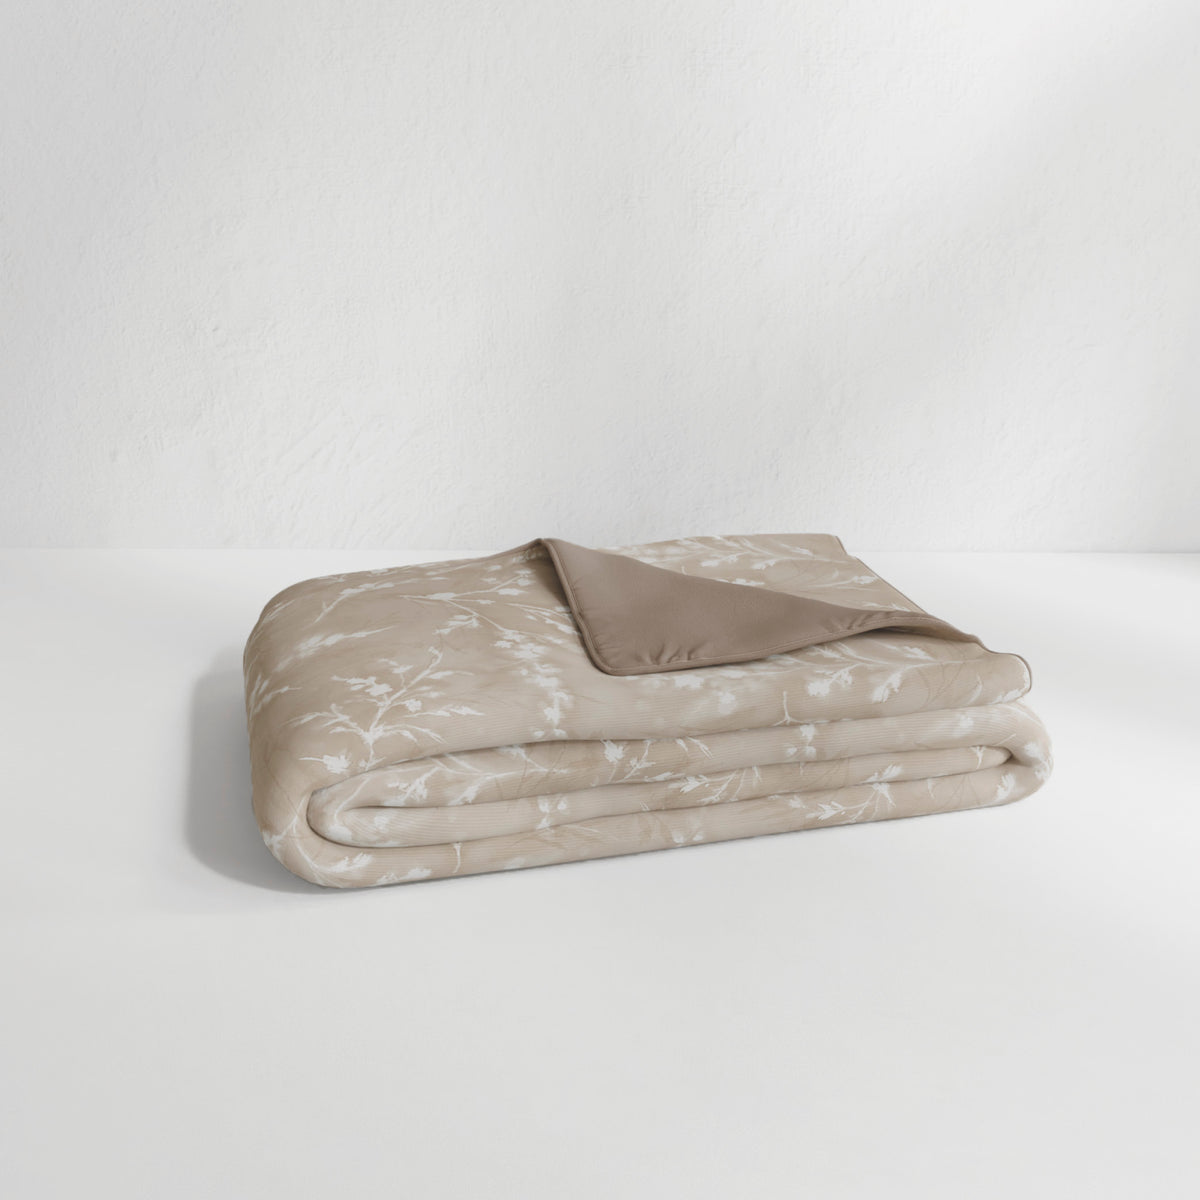 Image of the Floral Oatmeal Duvet Cover + Cooling neatly folded with the floral side facing up and the back right corner folded over to show the reversible plain Oatmeal side